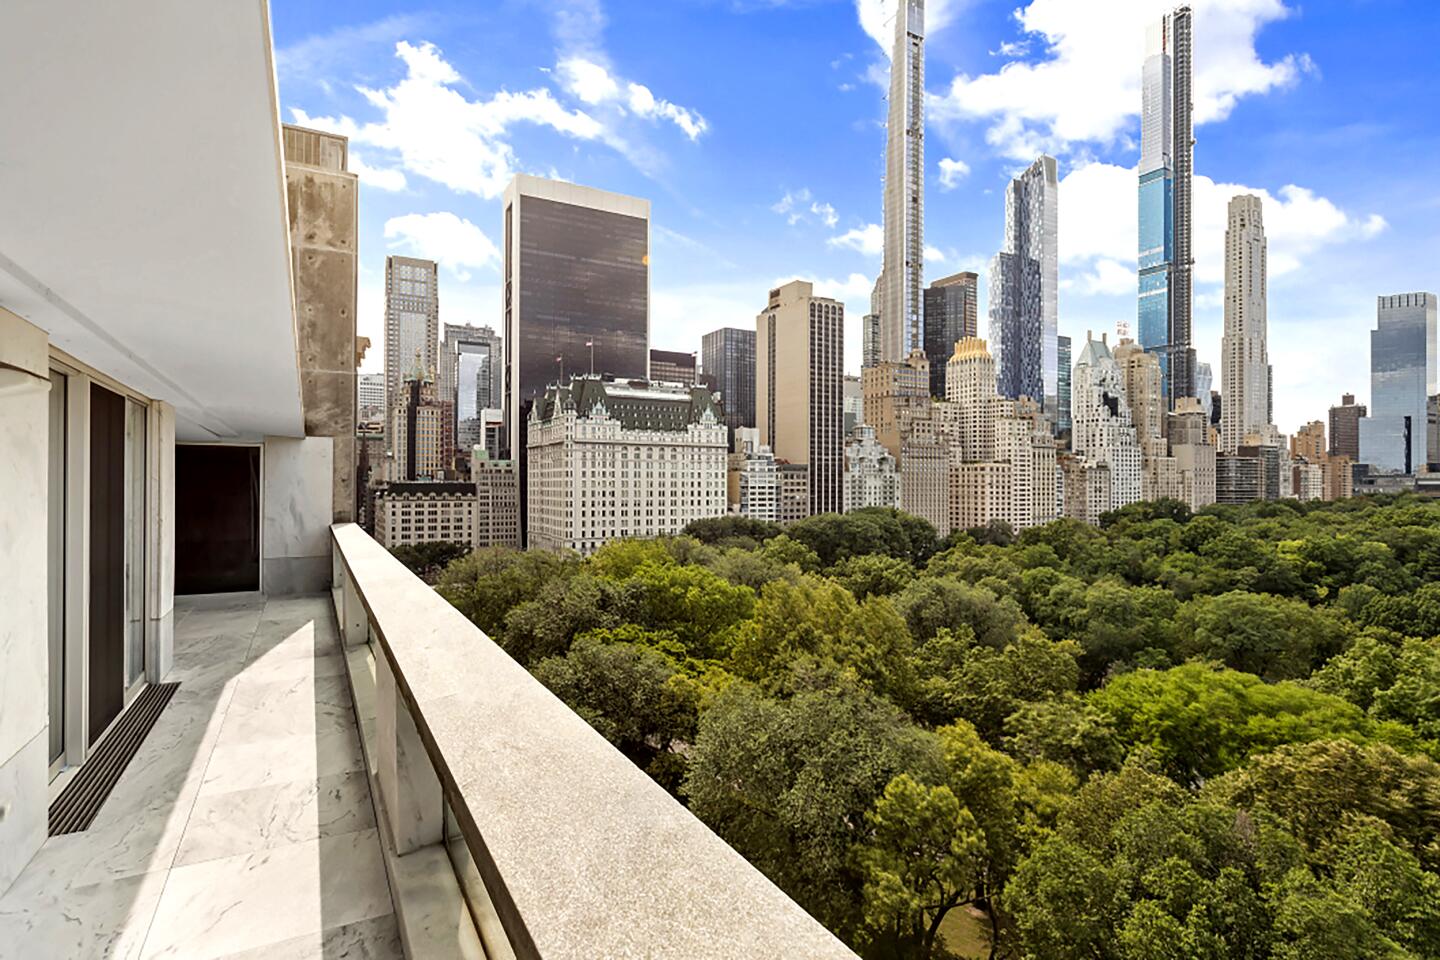 The Rockefeller family's Manhattan apartment's balcony view of Central Park